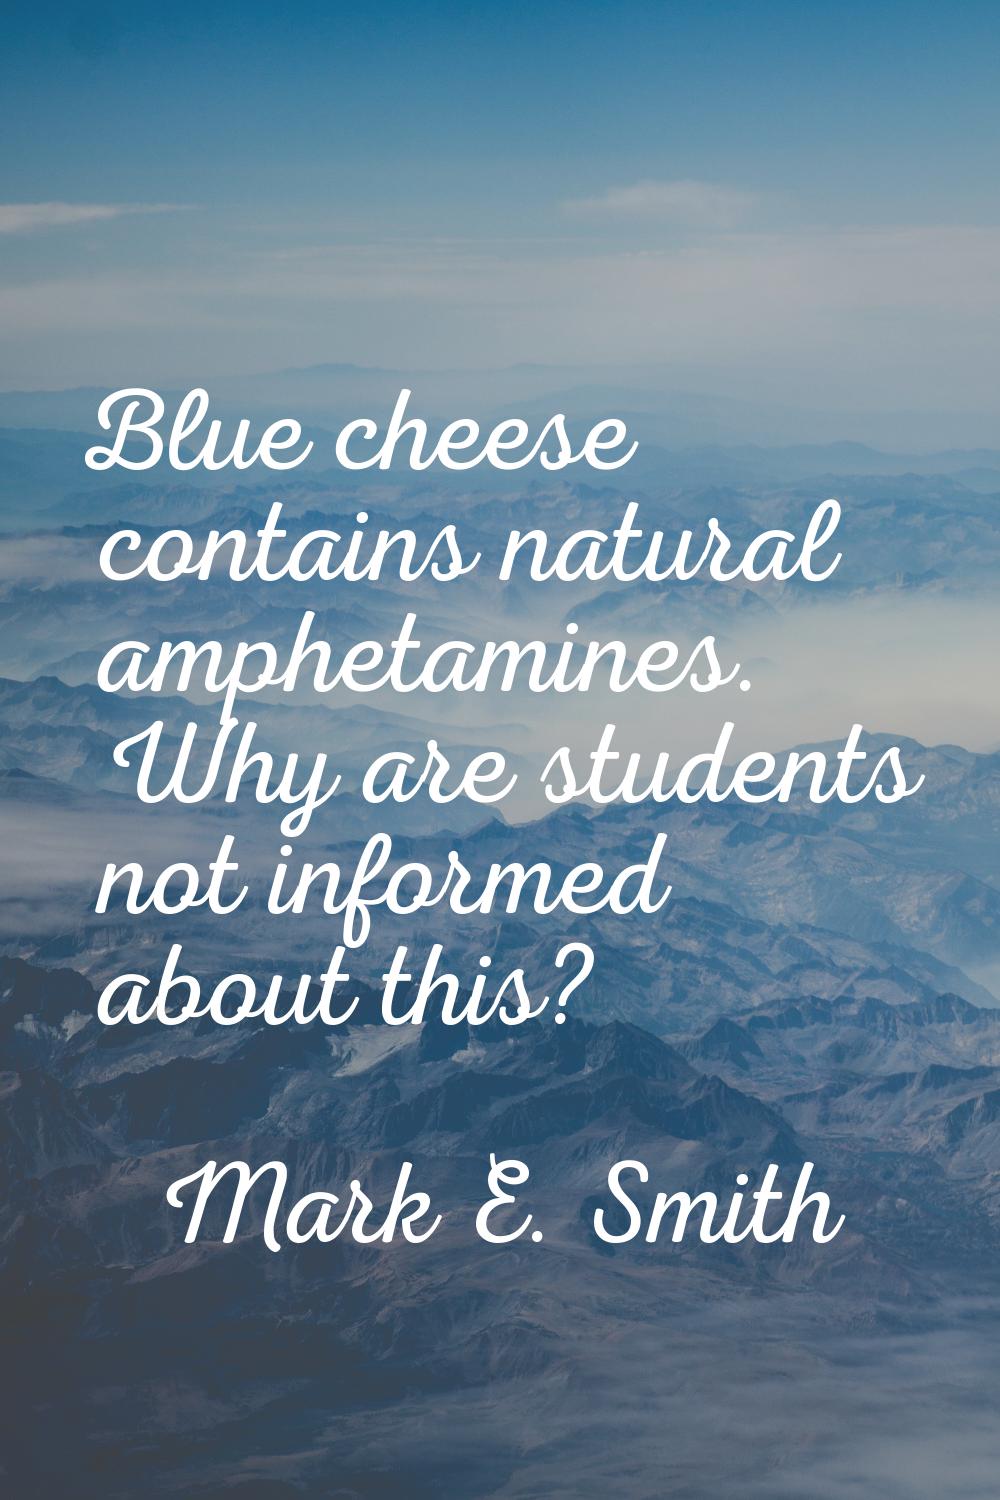 Blue cheese contains natural amphetamines. Why are students not informed about this?